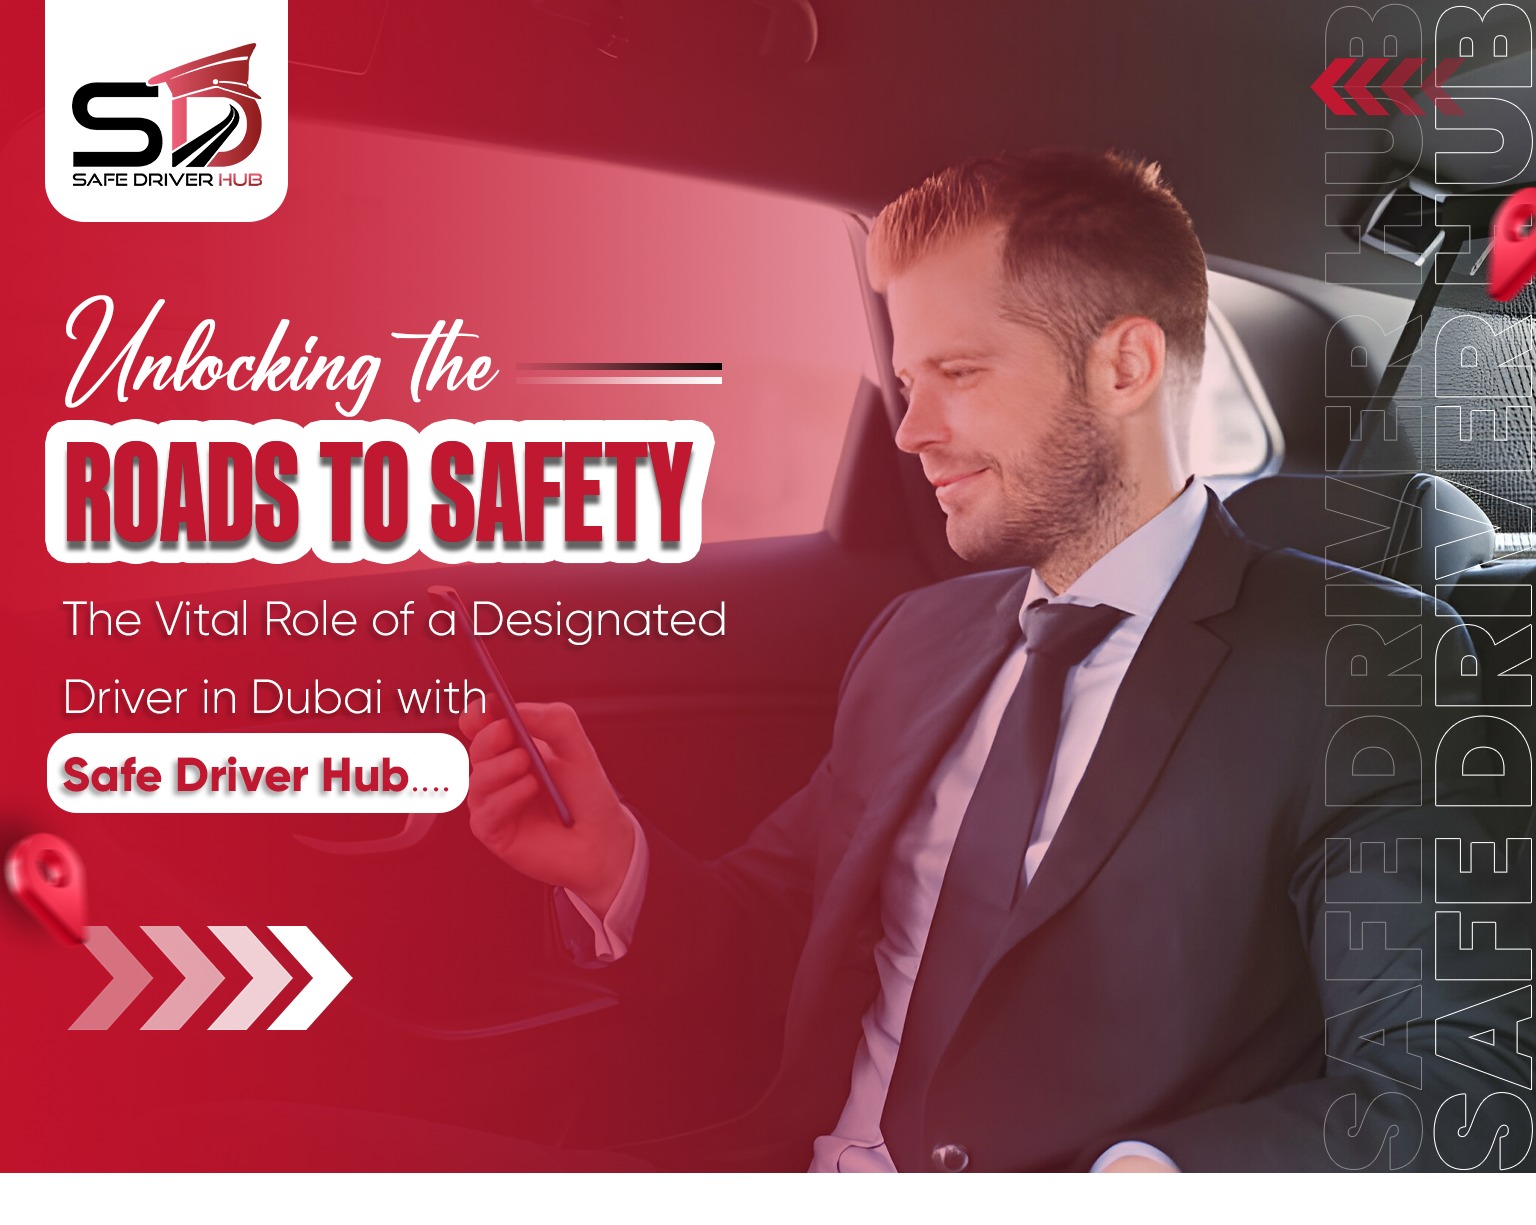 Unlocking-the-Roads-to-Safety-The-Vital-Role-of-a-Designated-Driver-in-Dubai-with-SafeDriver-Hub